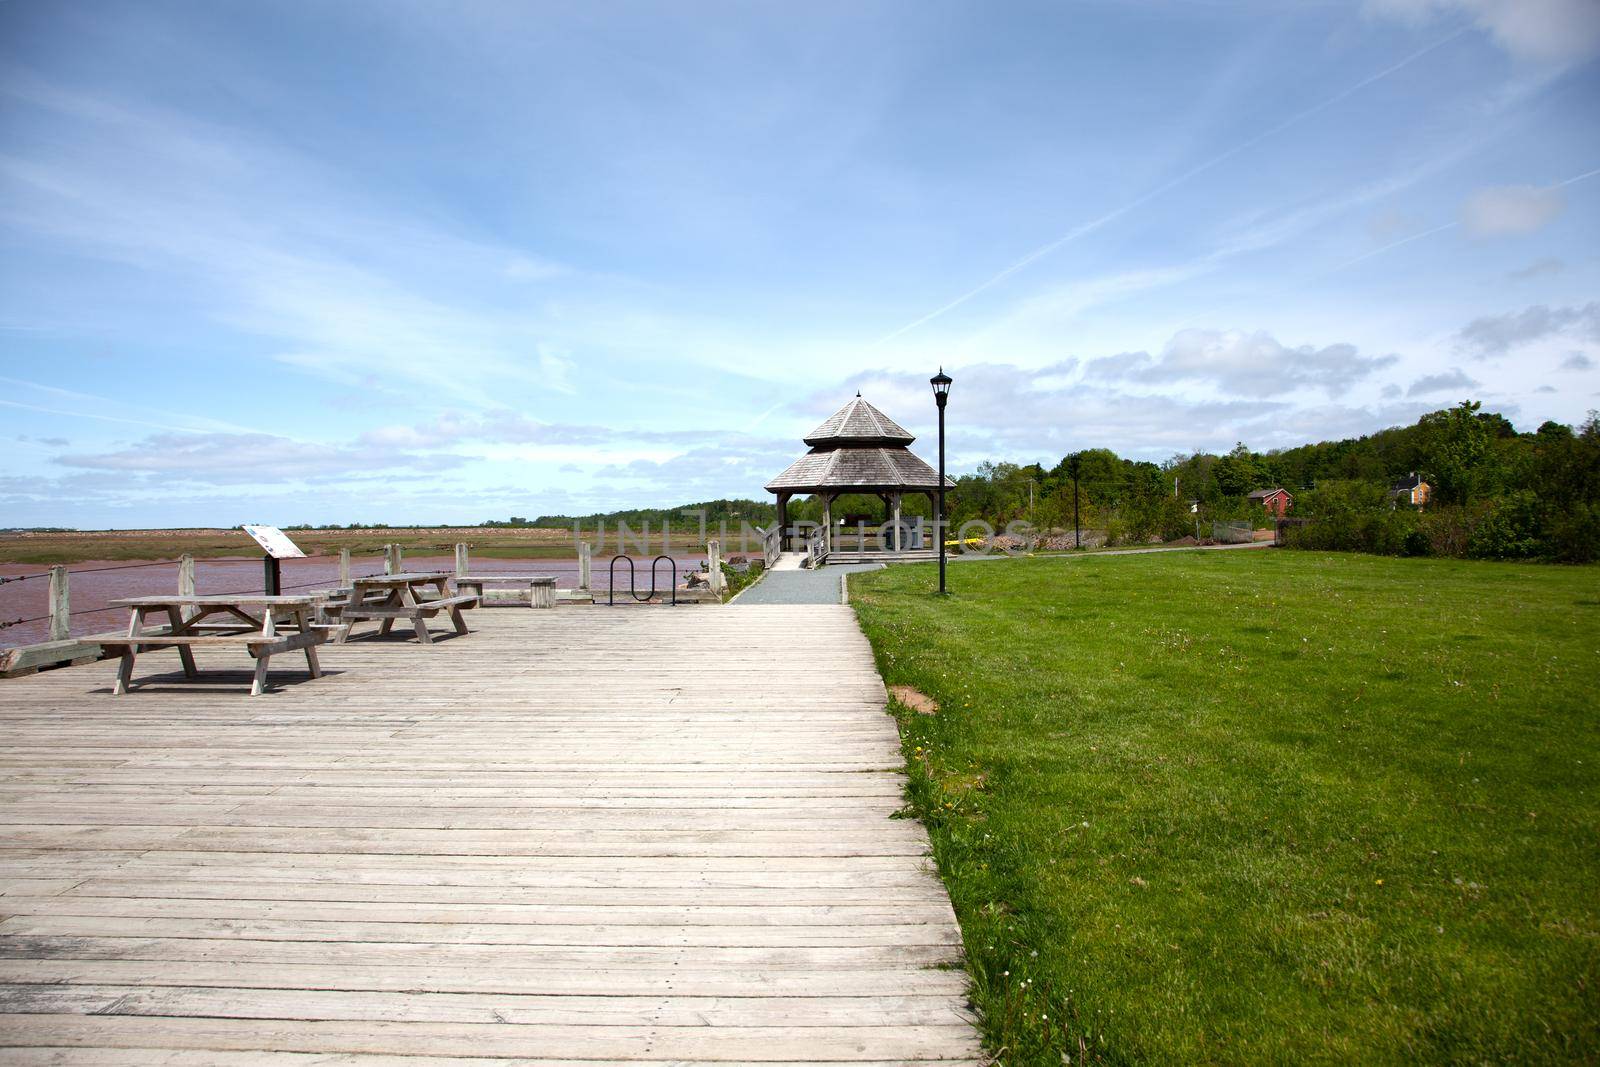 A brown gazebo by the waterfront in Wolfville, Nova Scotia